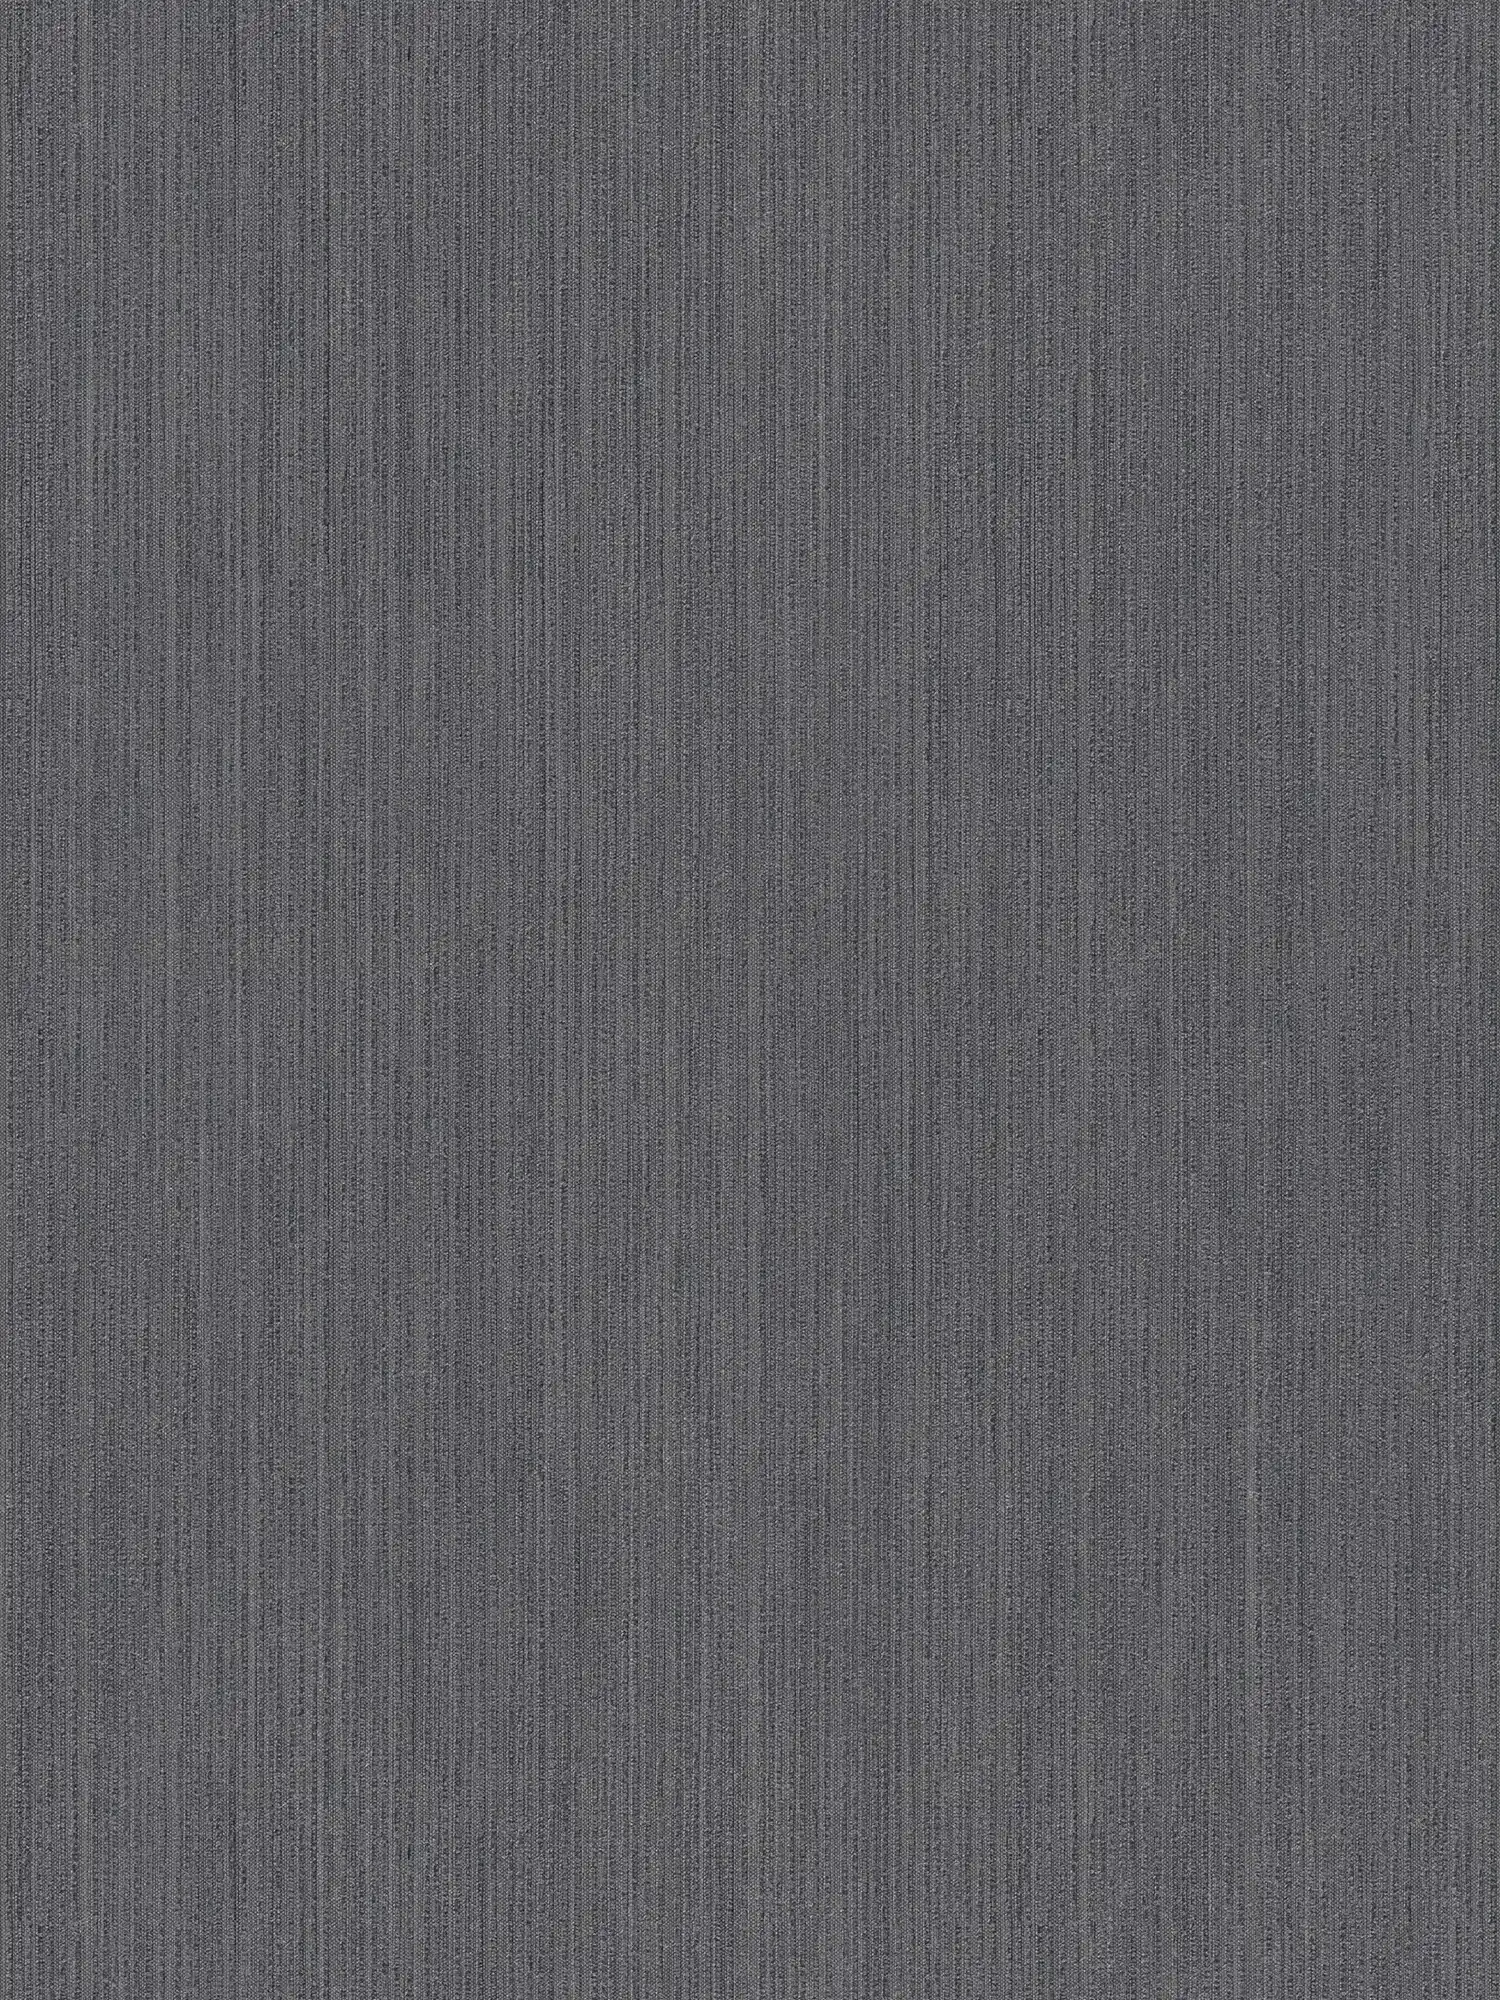 Plain wallpaper MICHALSKY with structure pattern - anthracite
